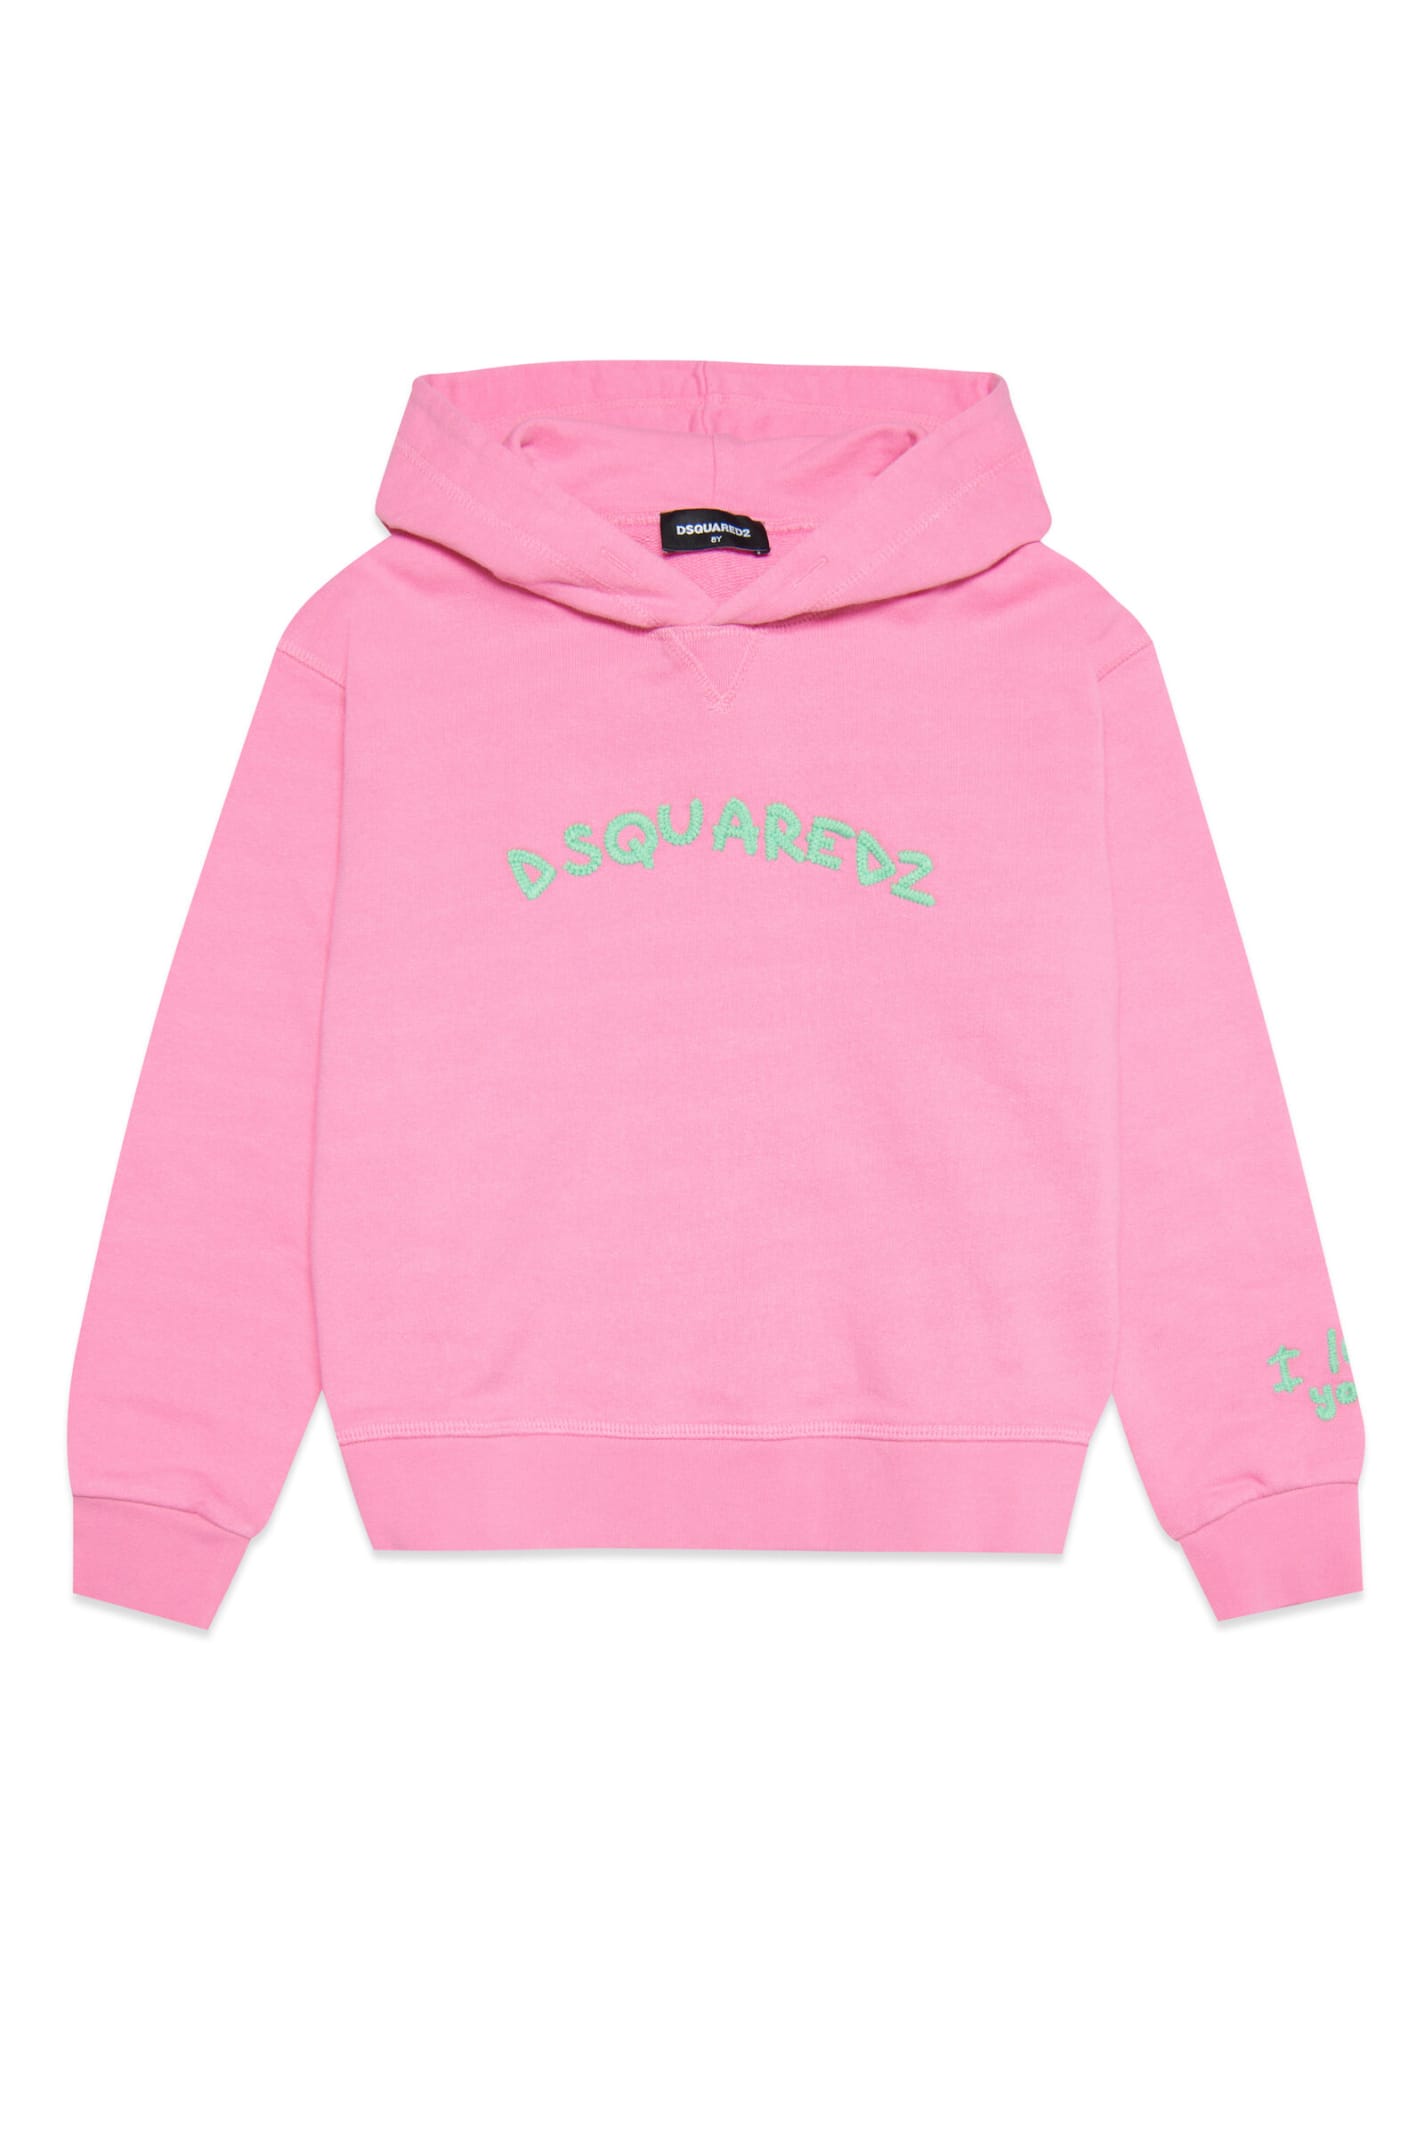 DSQUARED2 D2S687F BOXY SWEAT-SHIRT DSQUARED PINK HOODED SWEATSHIRT WITH EMBROIDERED LOGO